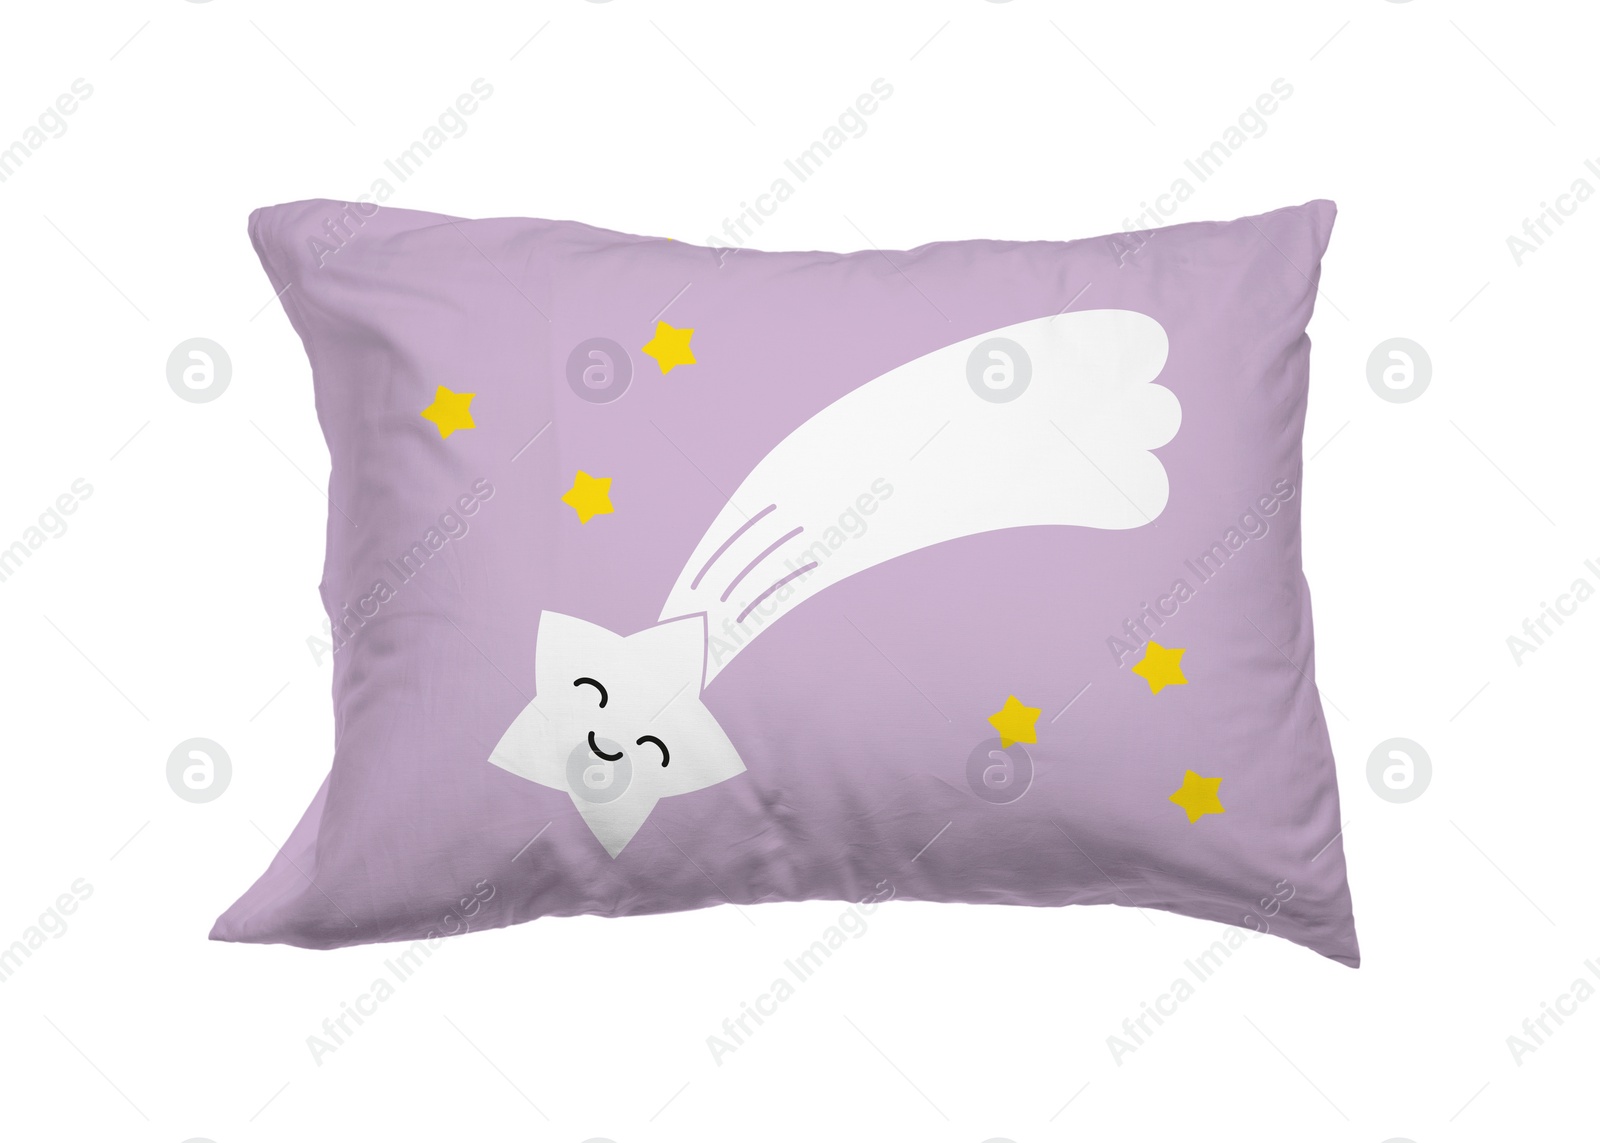 Image of Soft pillow with printed cute shooting star isolated on white